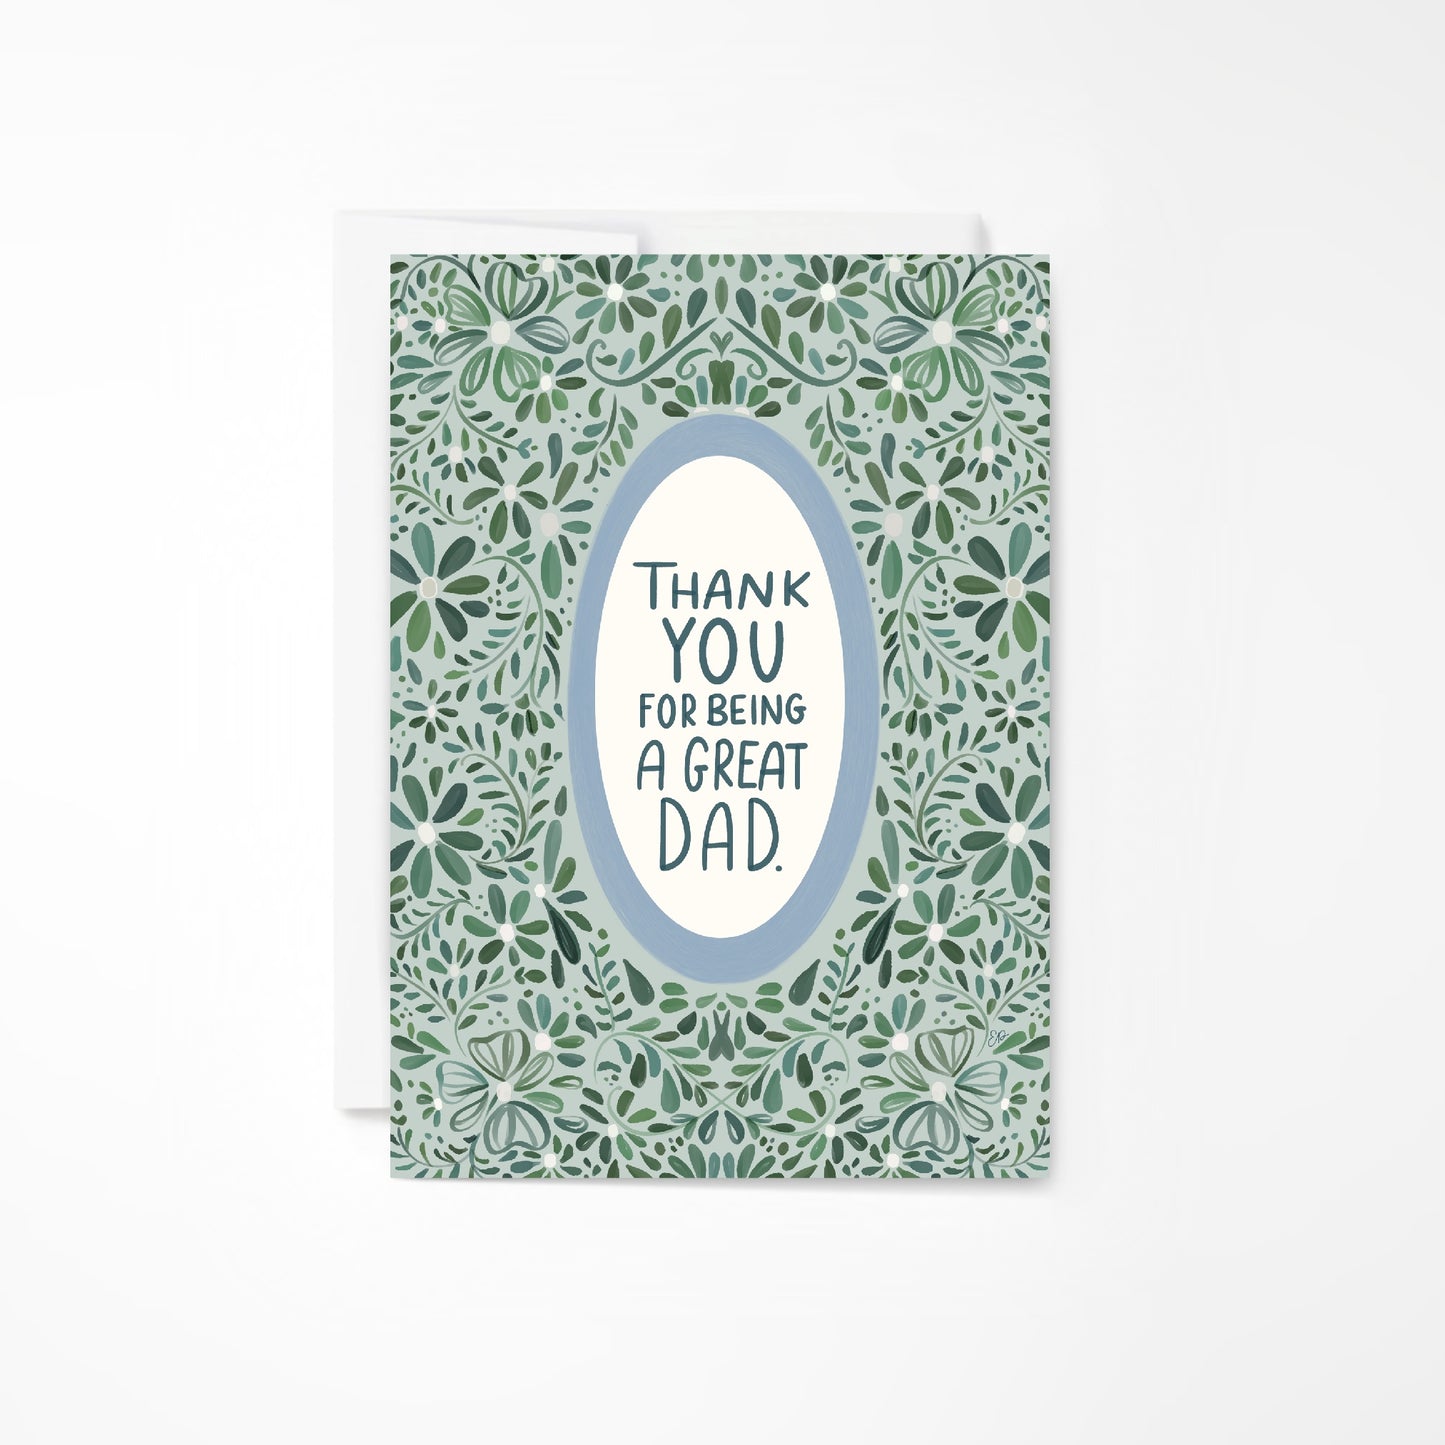 Thank You For Being A Great Dad Card